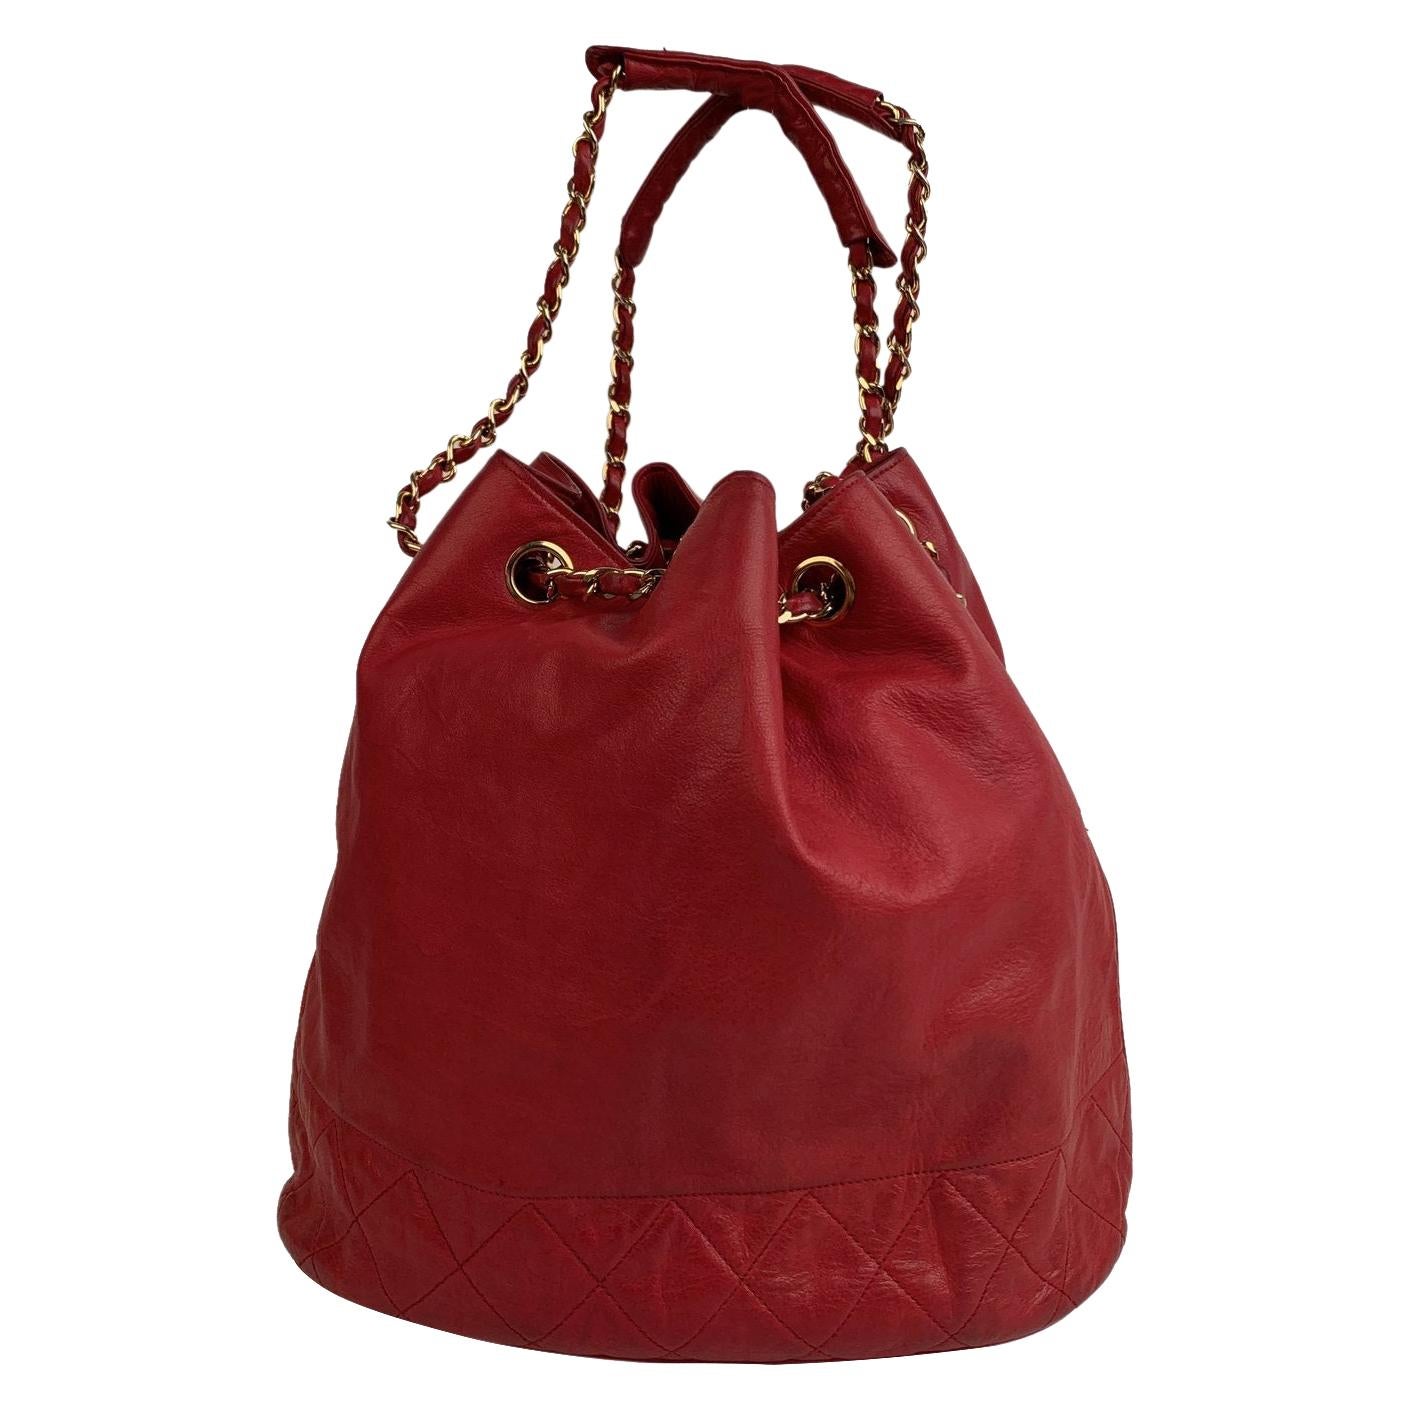 Chanel Vintage Red Leather Bucket Shoulder Bag with Bottom Quilting